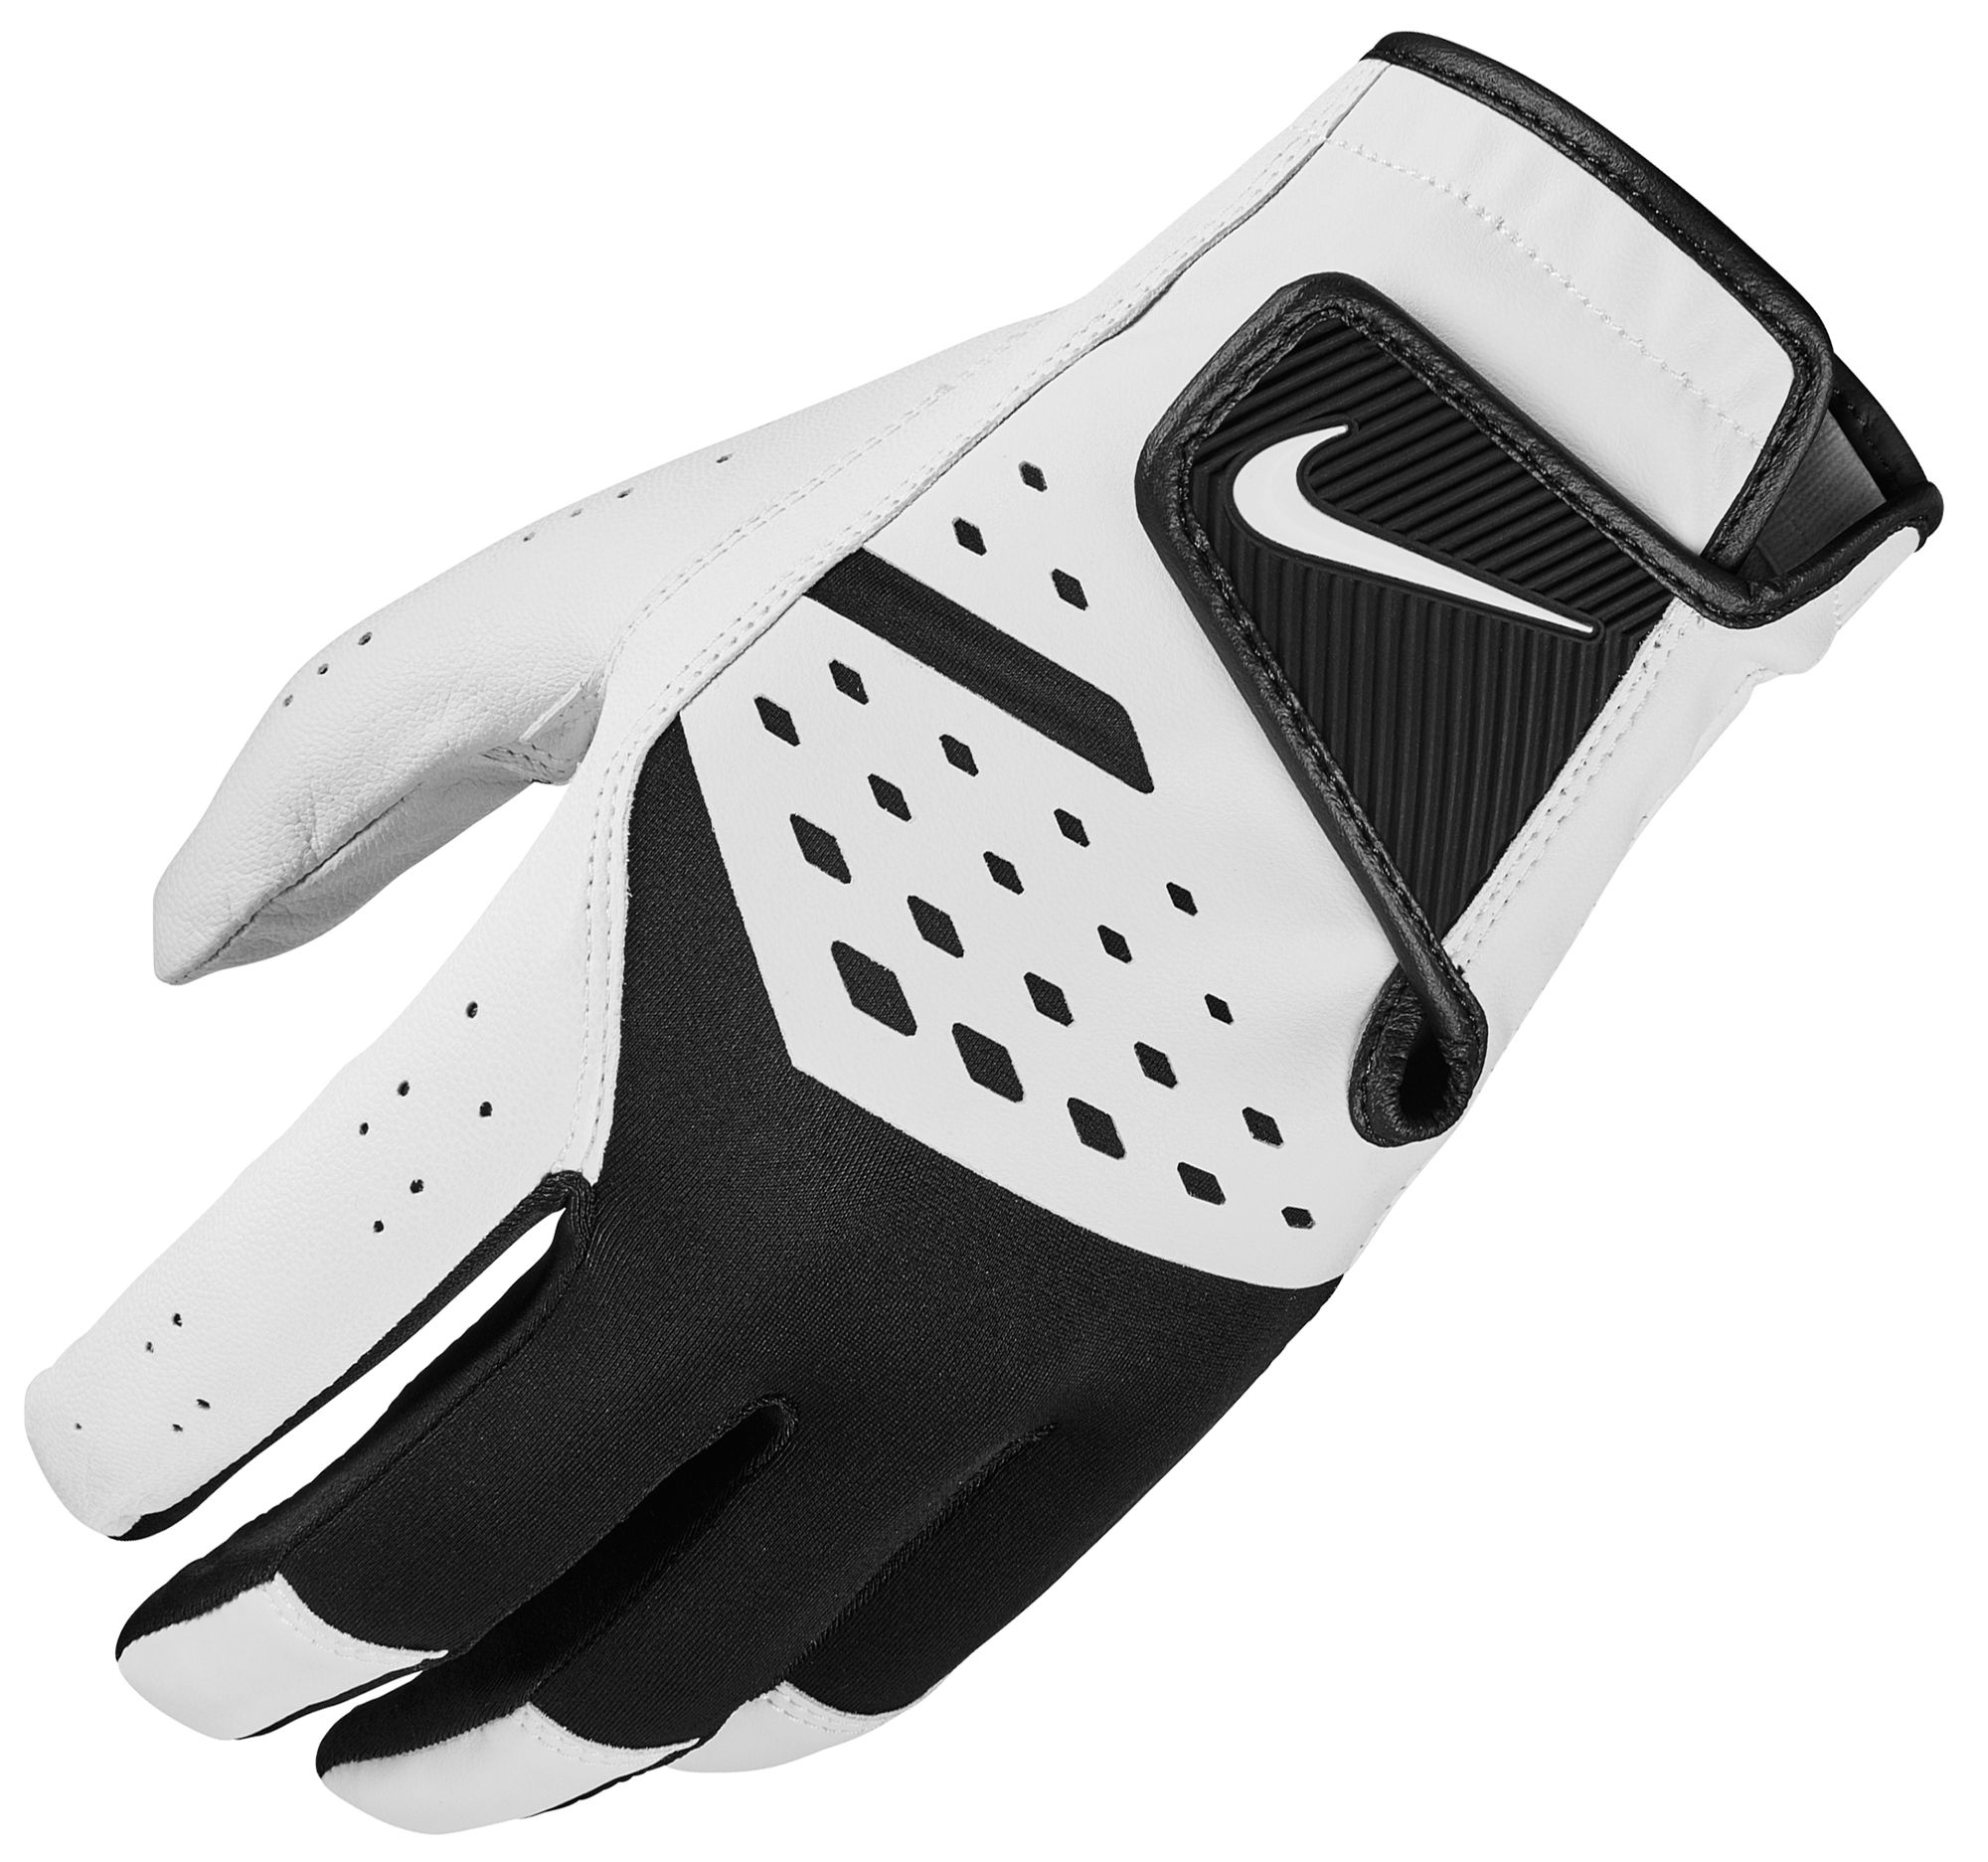 mens nike leather gloves